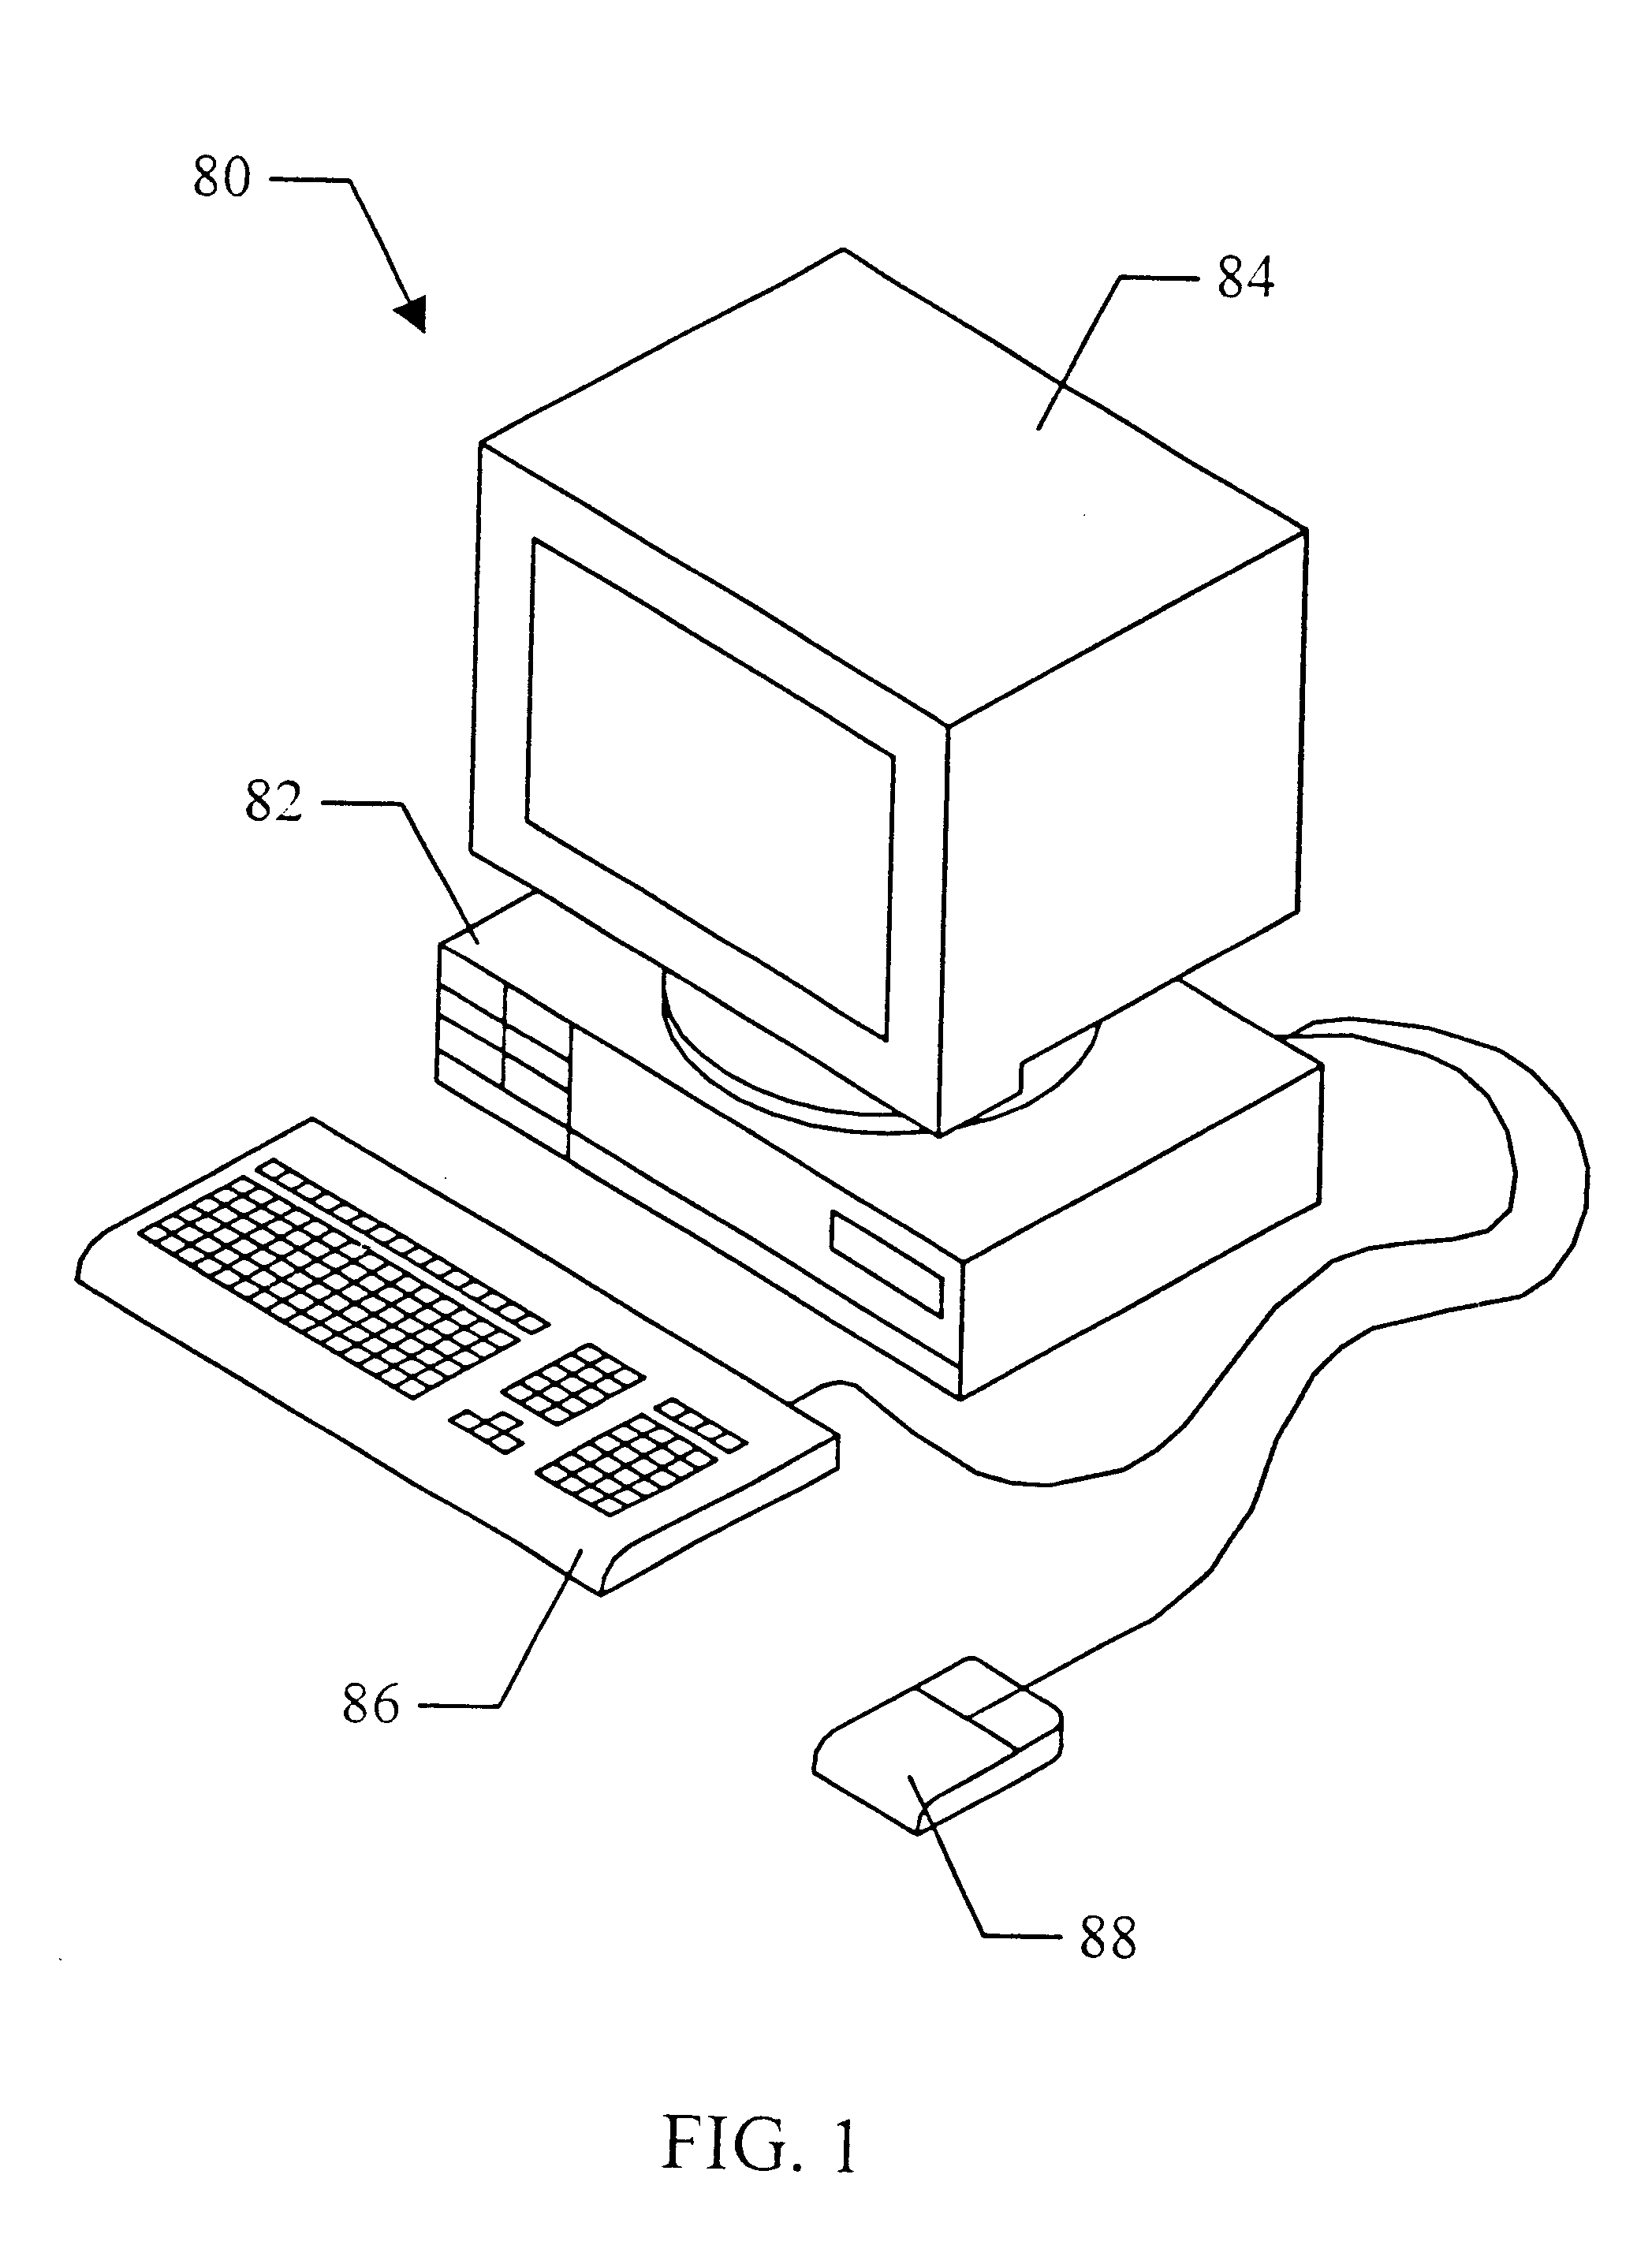 Dynamically adjusting a sample-to-pixel filter in response to user input and/or sensor input